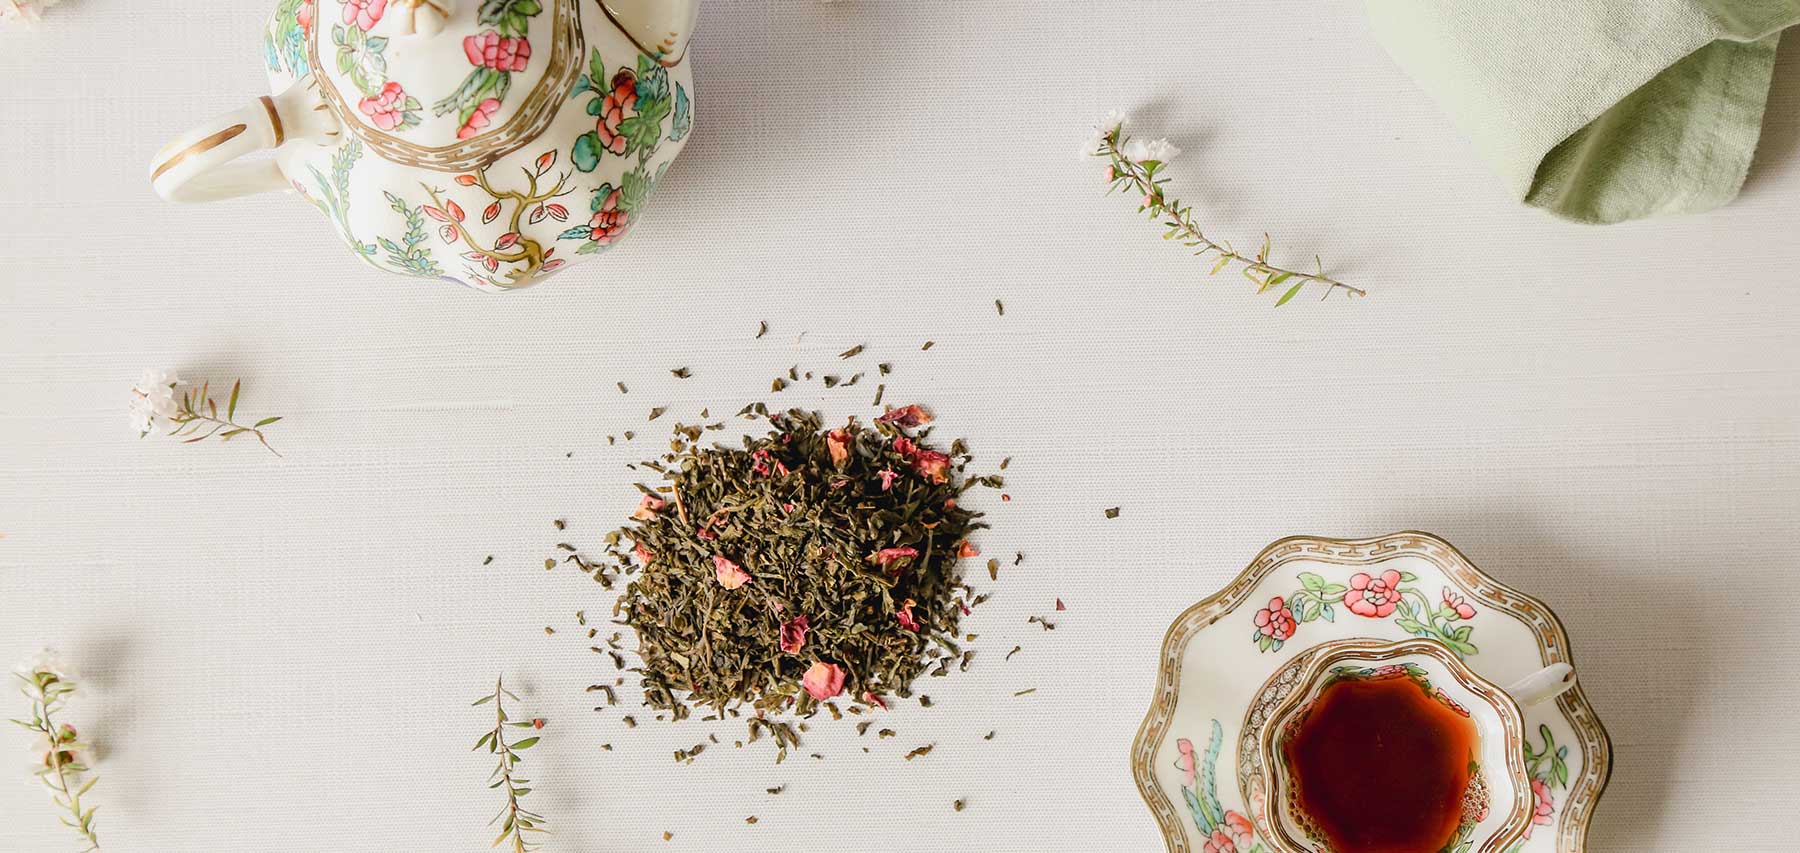 Green Tea with rose arranged on a table with vintage teapot and teacup with flowers